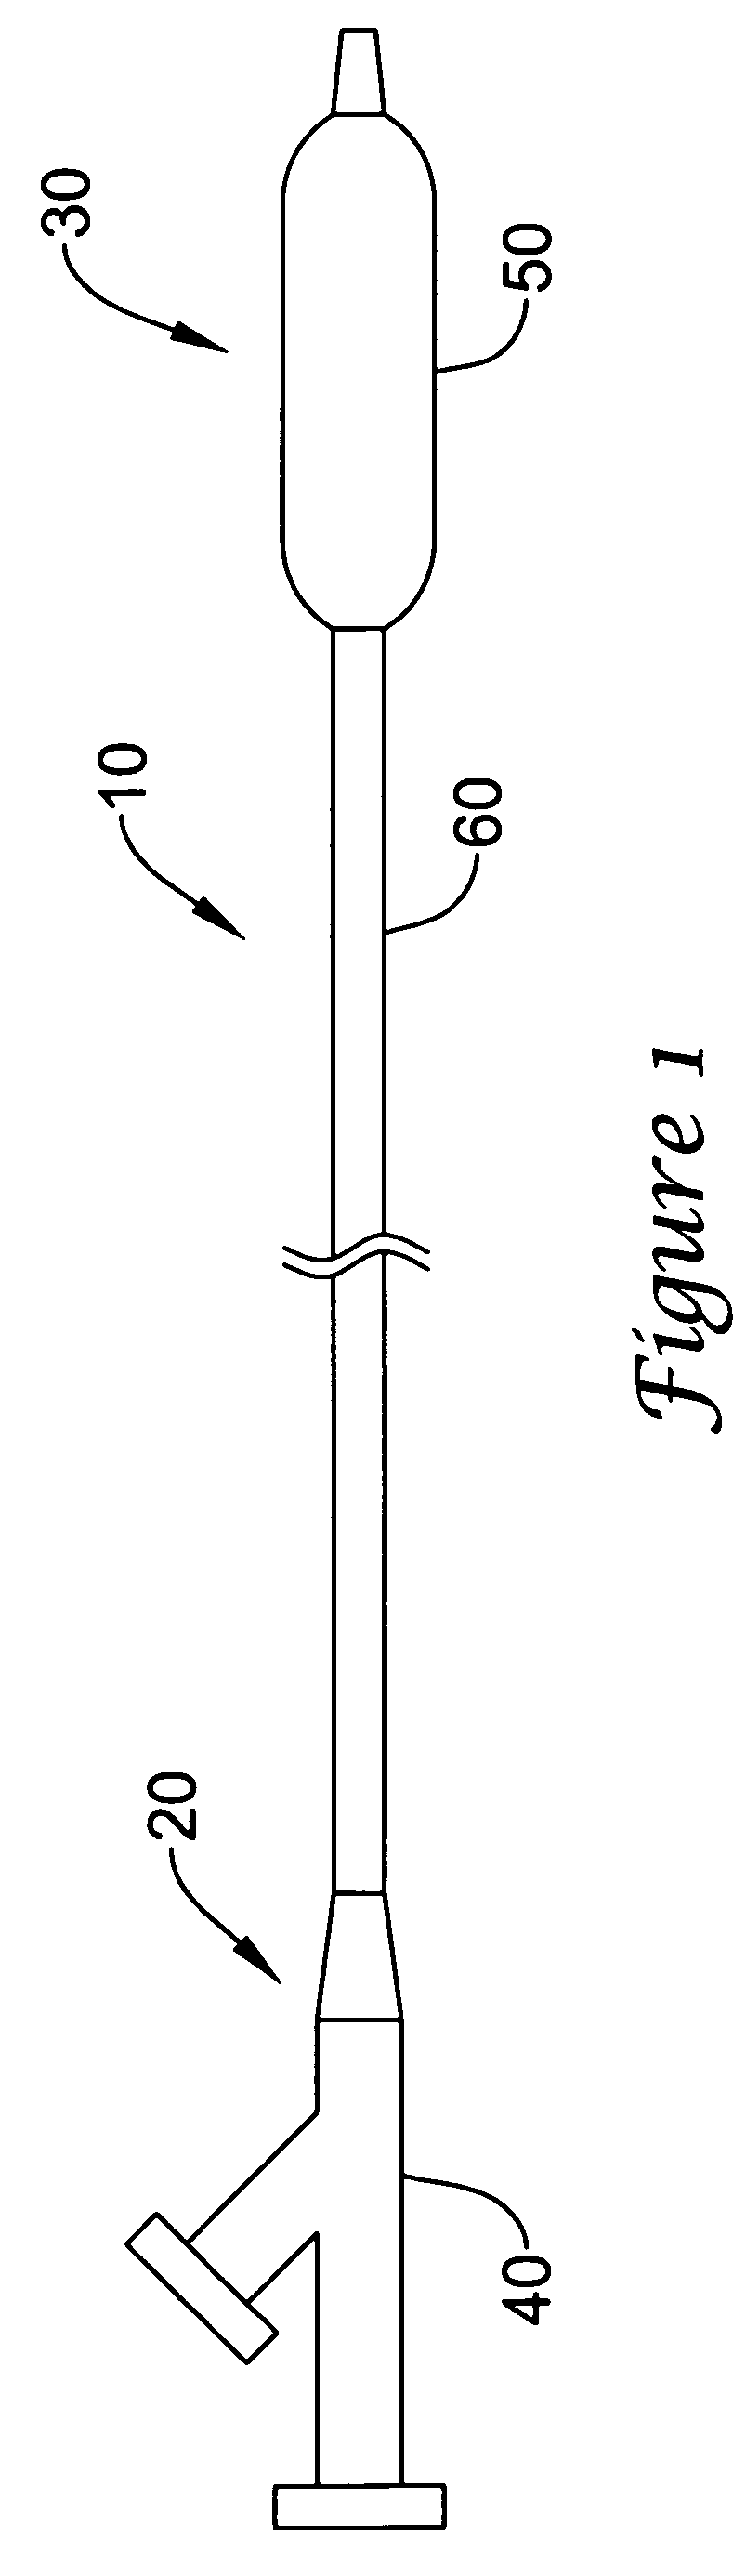 Catheter having an ultra soft tip and methods for making the same